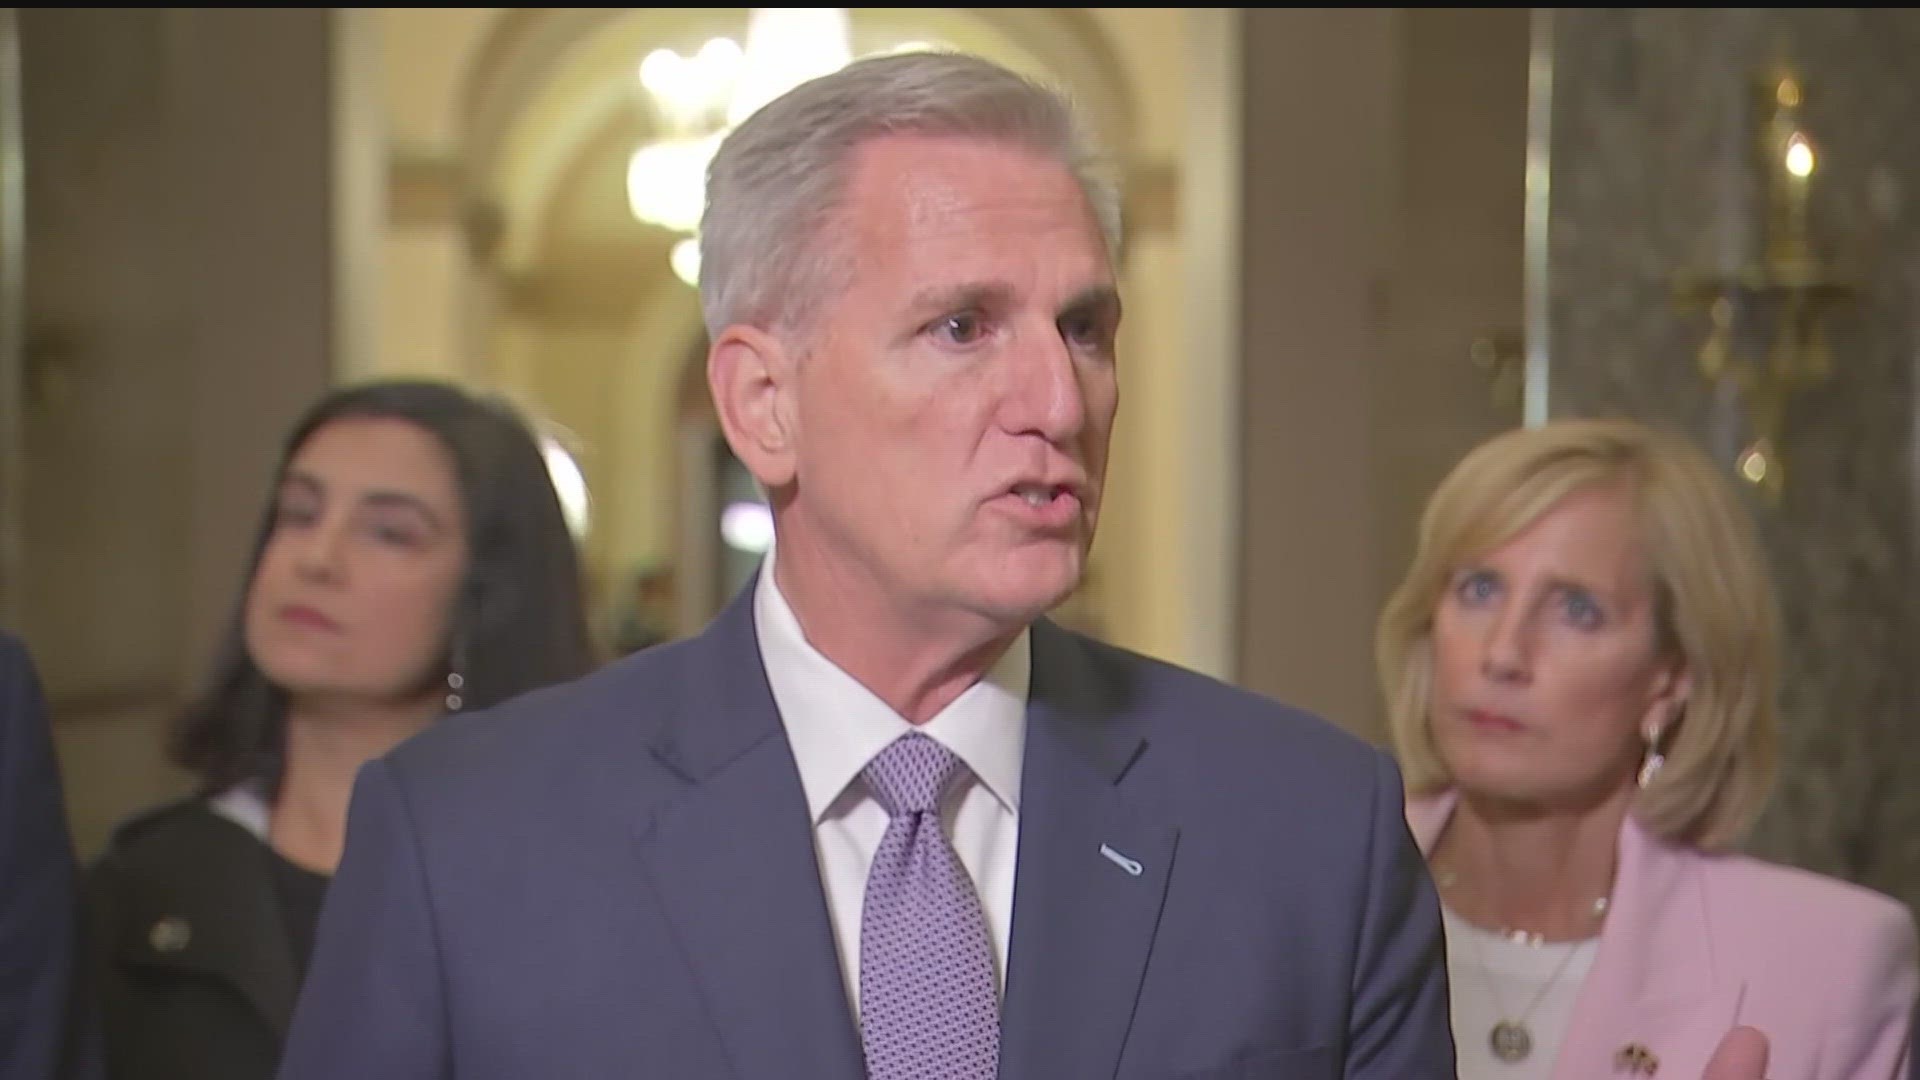 According to the Washington Post, Republicans are looking to oust House speaker Kevin McCarthy and replace him with Minnesota's Tom Emmer.